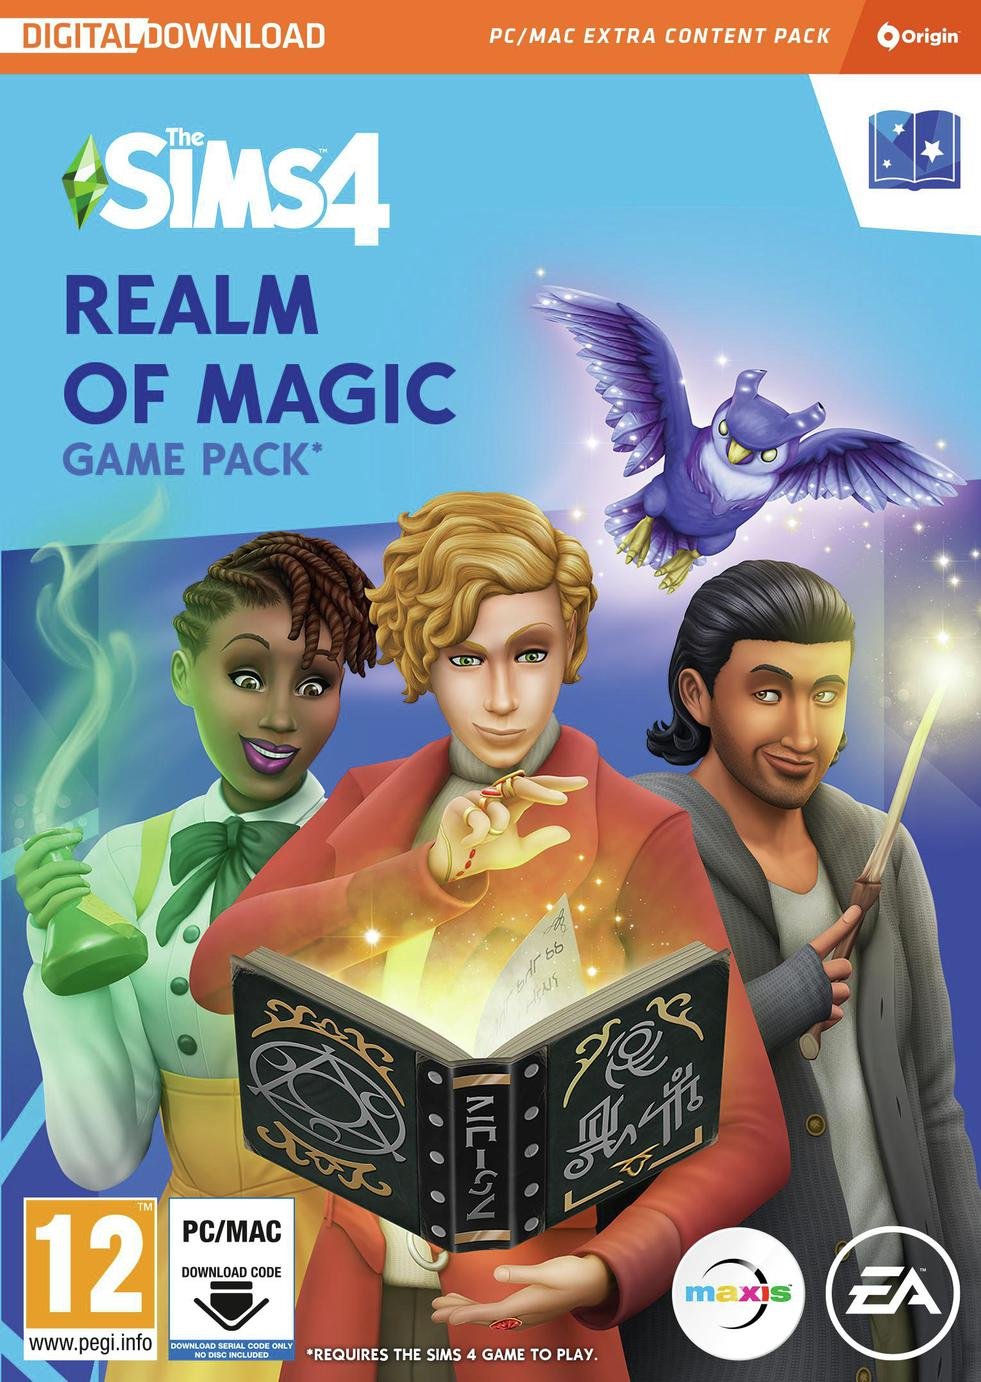 The Sims 4 Realm Of Magic Game Pack PC Game